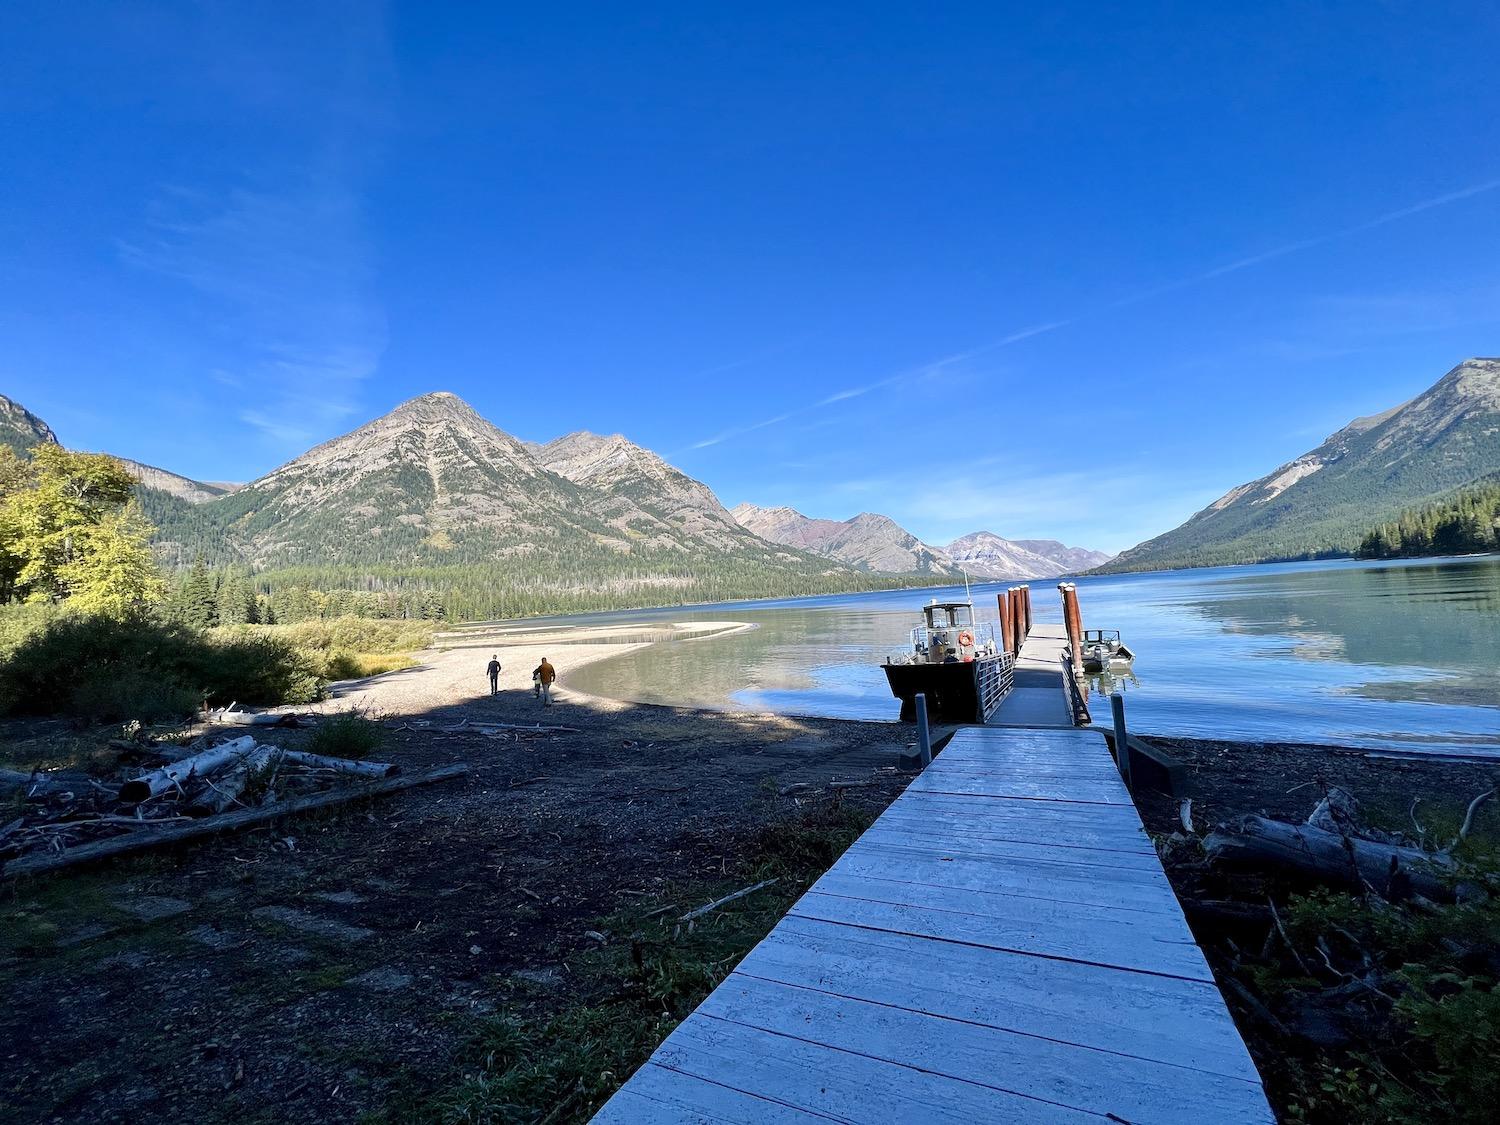 From Goat Haunt in Montana, you can look north along Upper Waterton Lake towards Alberta.